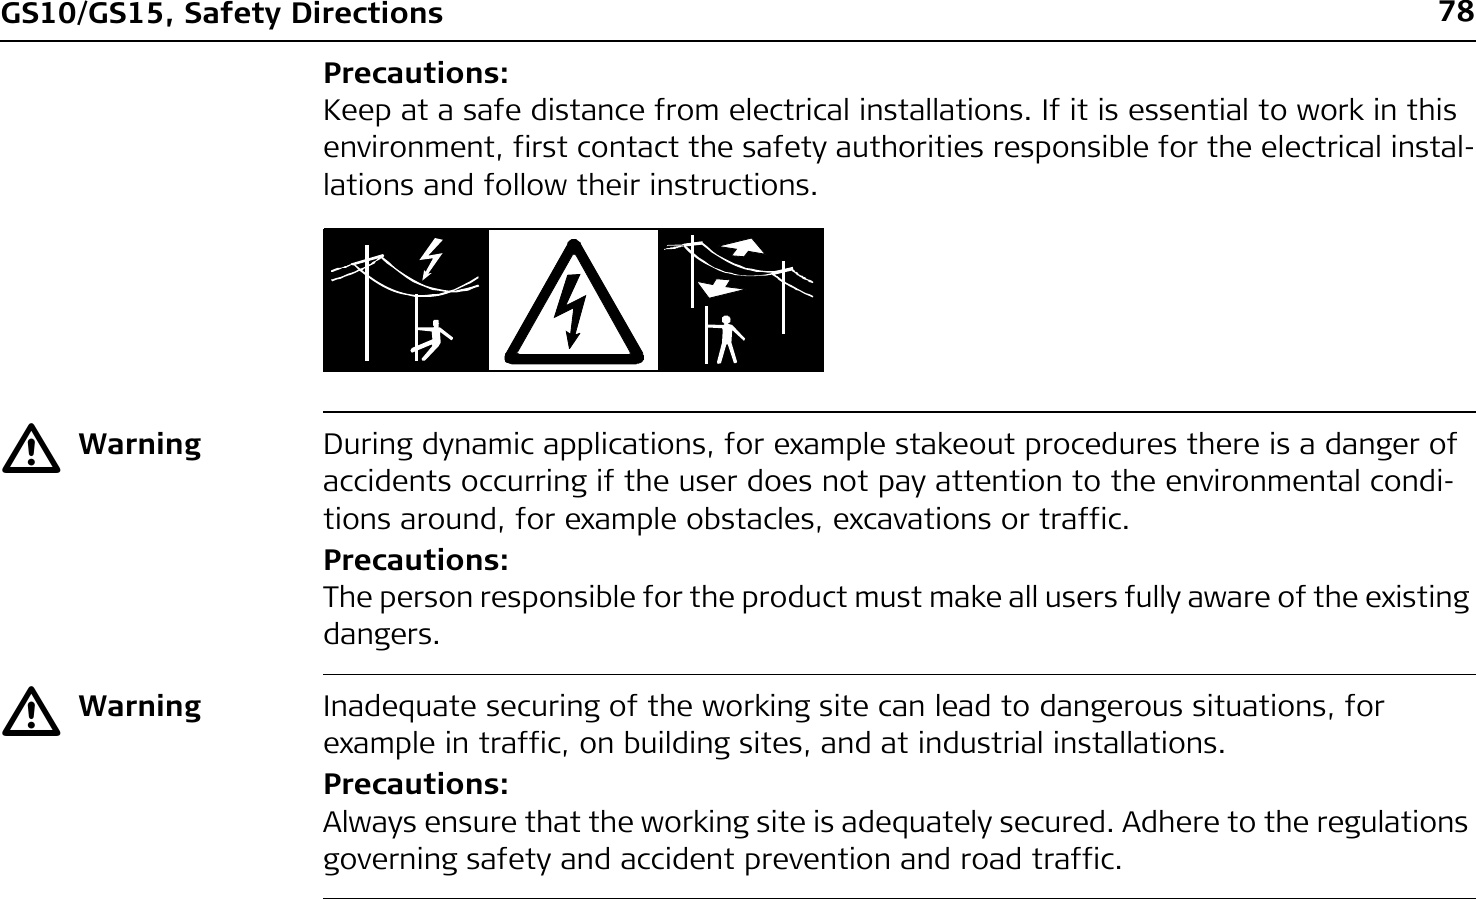 78GS10/GS15, Safety DirectionsPrecautions:Keep at a safe distance from electrical installations. If it is essential to work in this environment, first contact the safety authorities responsible for the electrical instal-lations and follow their instructions.ƽWarning During dynamic applications, for example stakeout procedures there is a danger of accidents occurring if the user does not pay attention to the environmental condi-tions around, for example obstacles, excavations or traffic.Precautions:The person responsible for the product must make all users fully aware of the existing dangers.ƽWarning Inadequate securing of the working site can lead to dangerous situations, for example in traffic, on building sites, and at industrial installations.Precautions:Always ensure that the working site is adequately secured. Adhere to the regulations governing safety and accident prevention and road traffic.